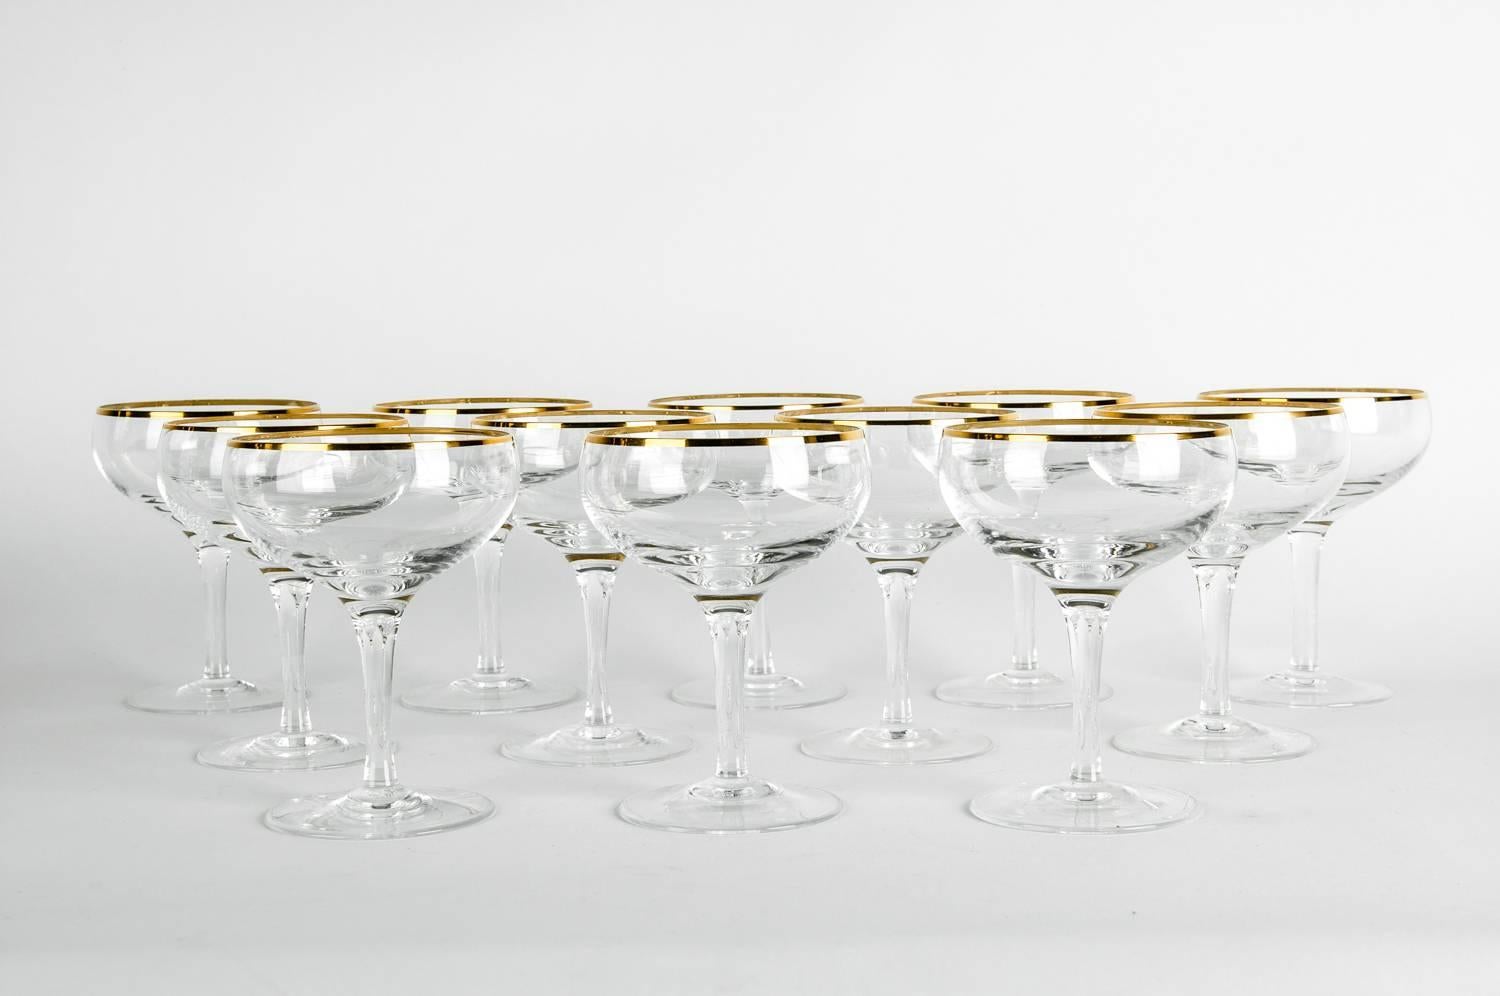 Vintage crystal champagne coupe glassware with gold trimmed top. Each glass is in excellent condition. Each glass coupe measure 5 inches high x 3.5 inches top diameter.